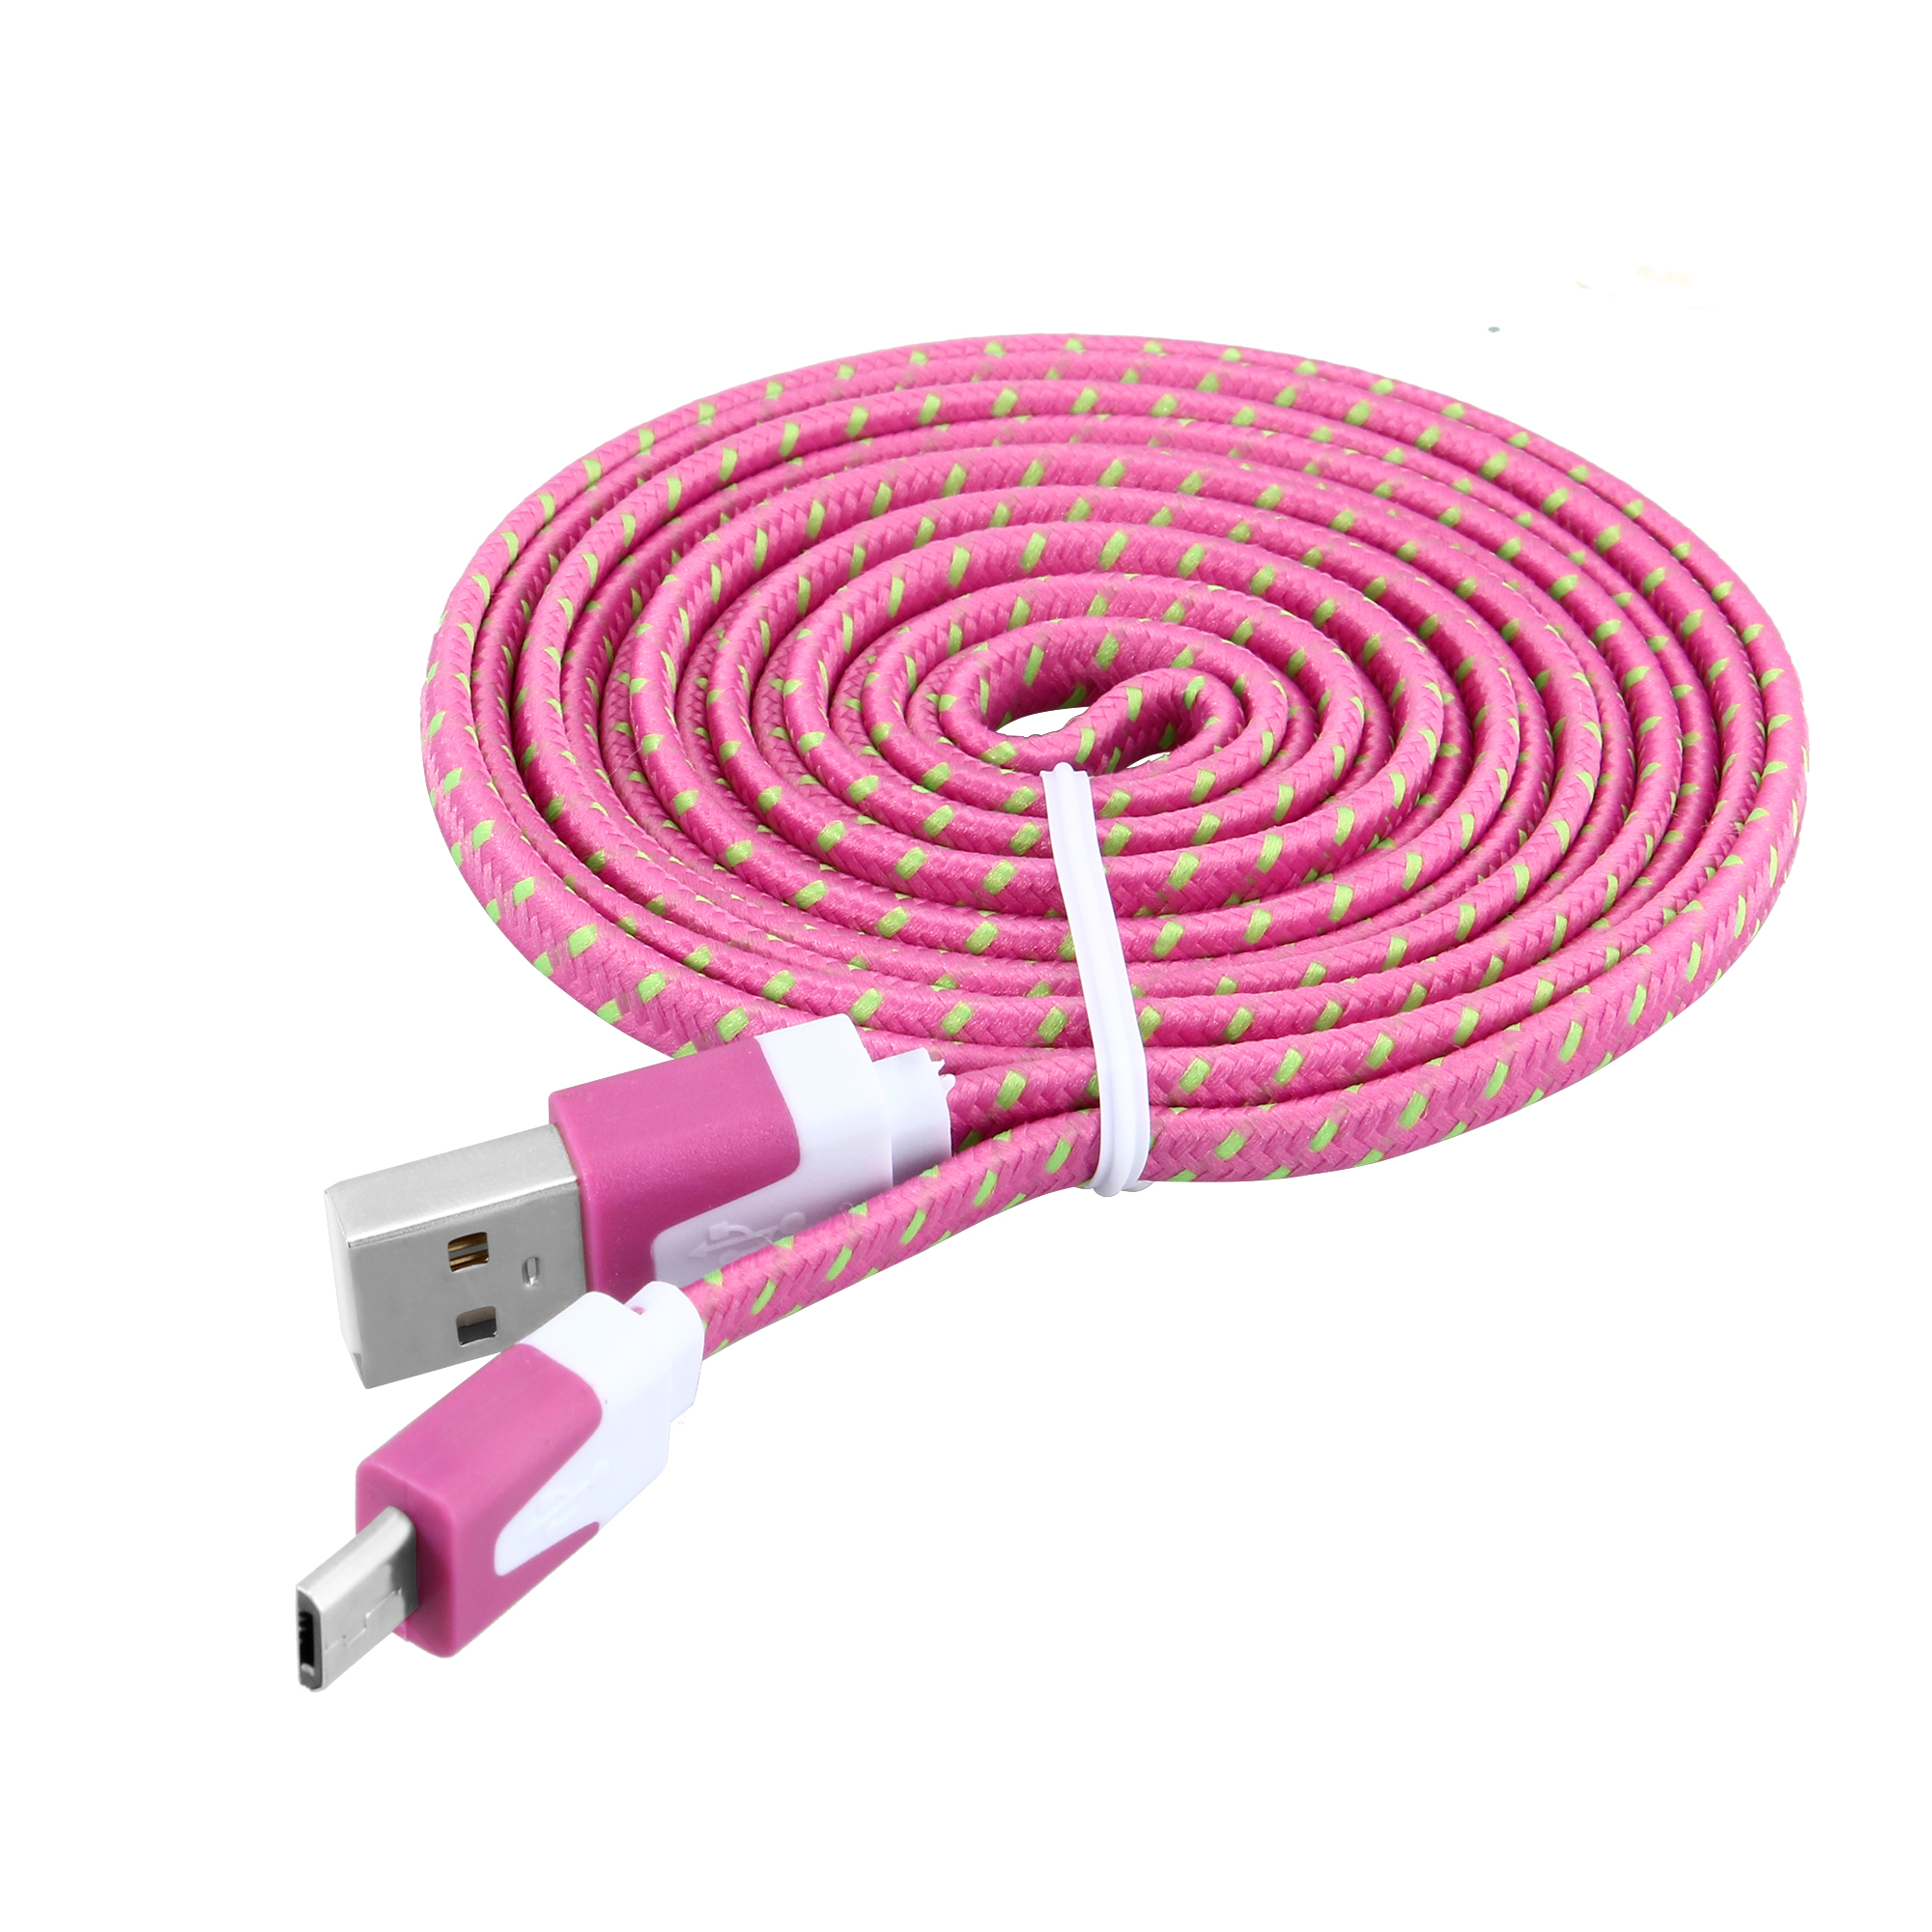 2m Weave Braid USB Data Sync Charging Cable for Samsung Android Phones - Rose Red